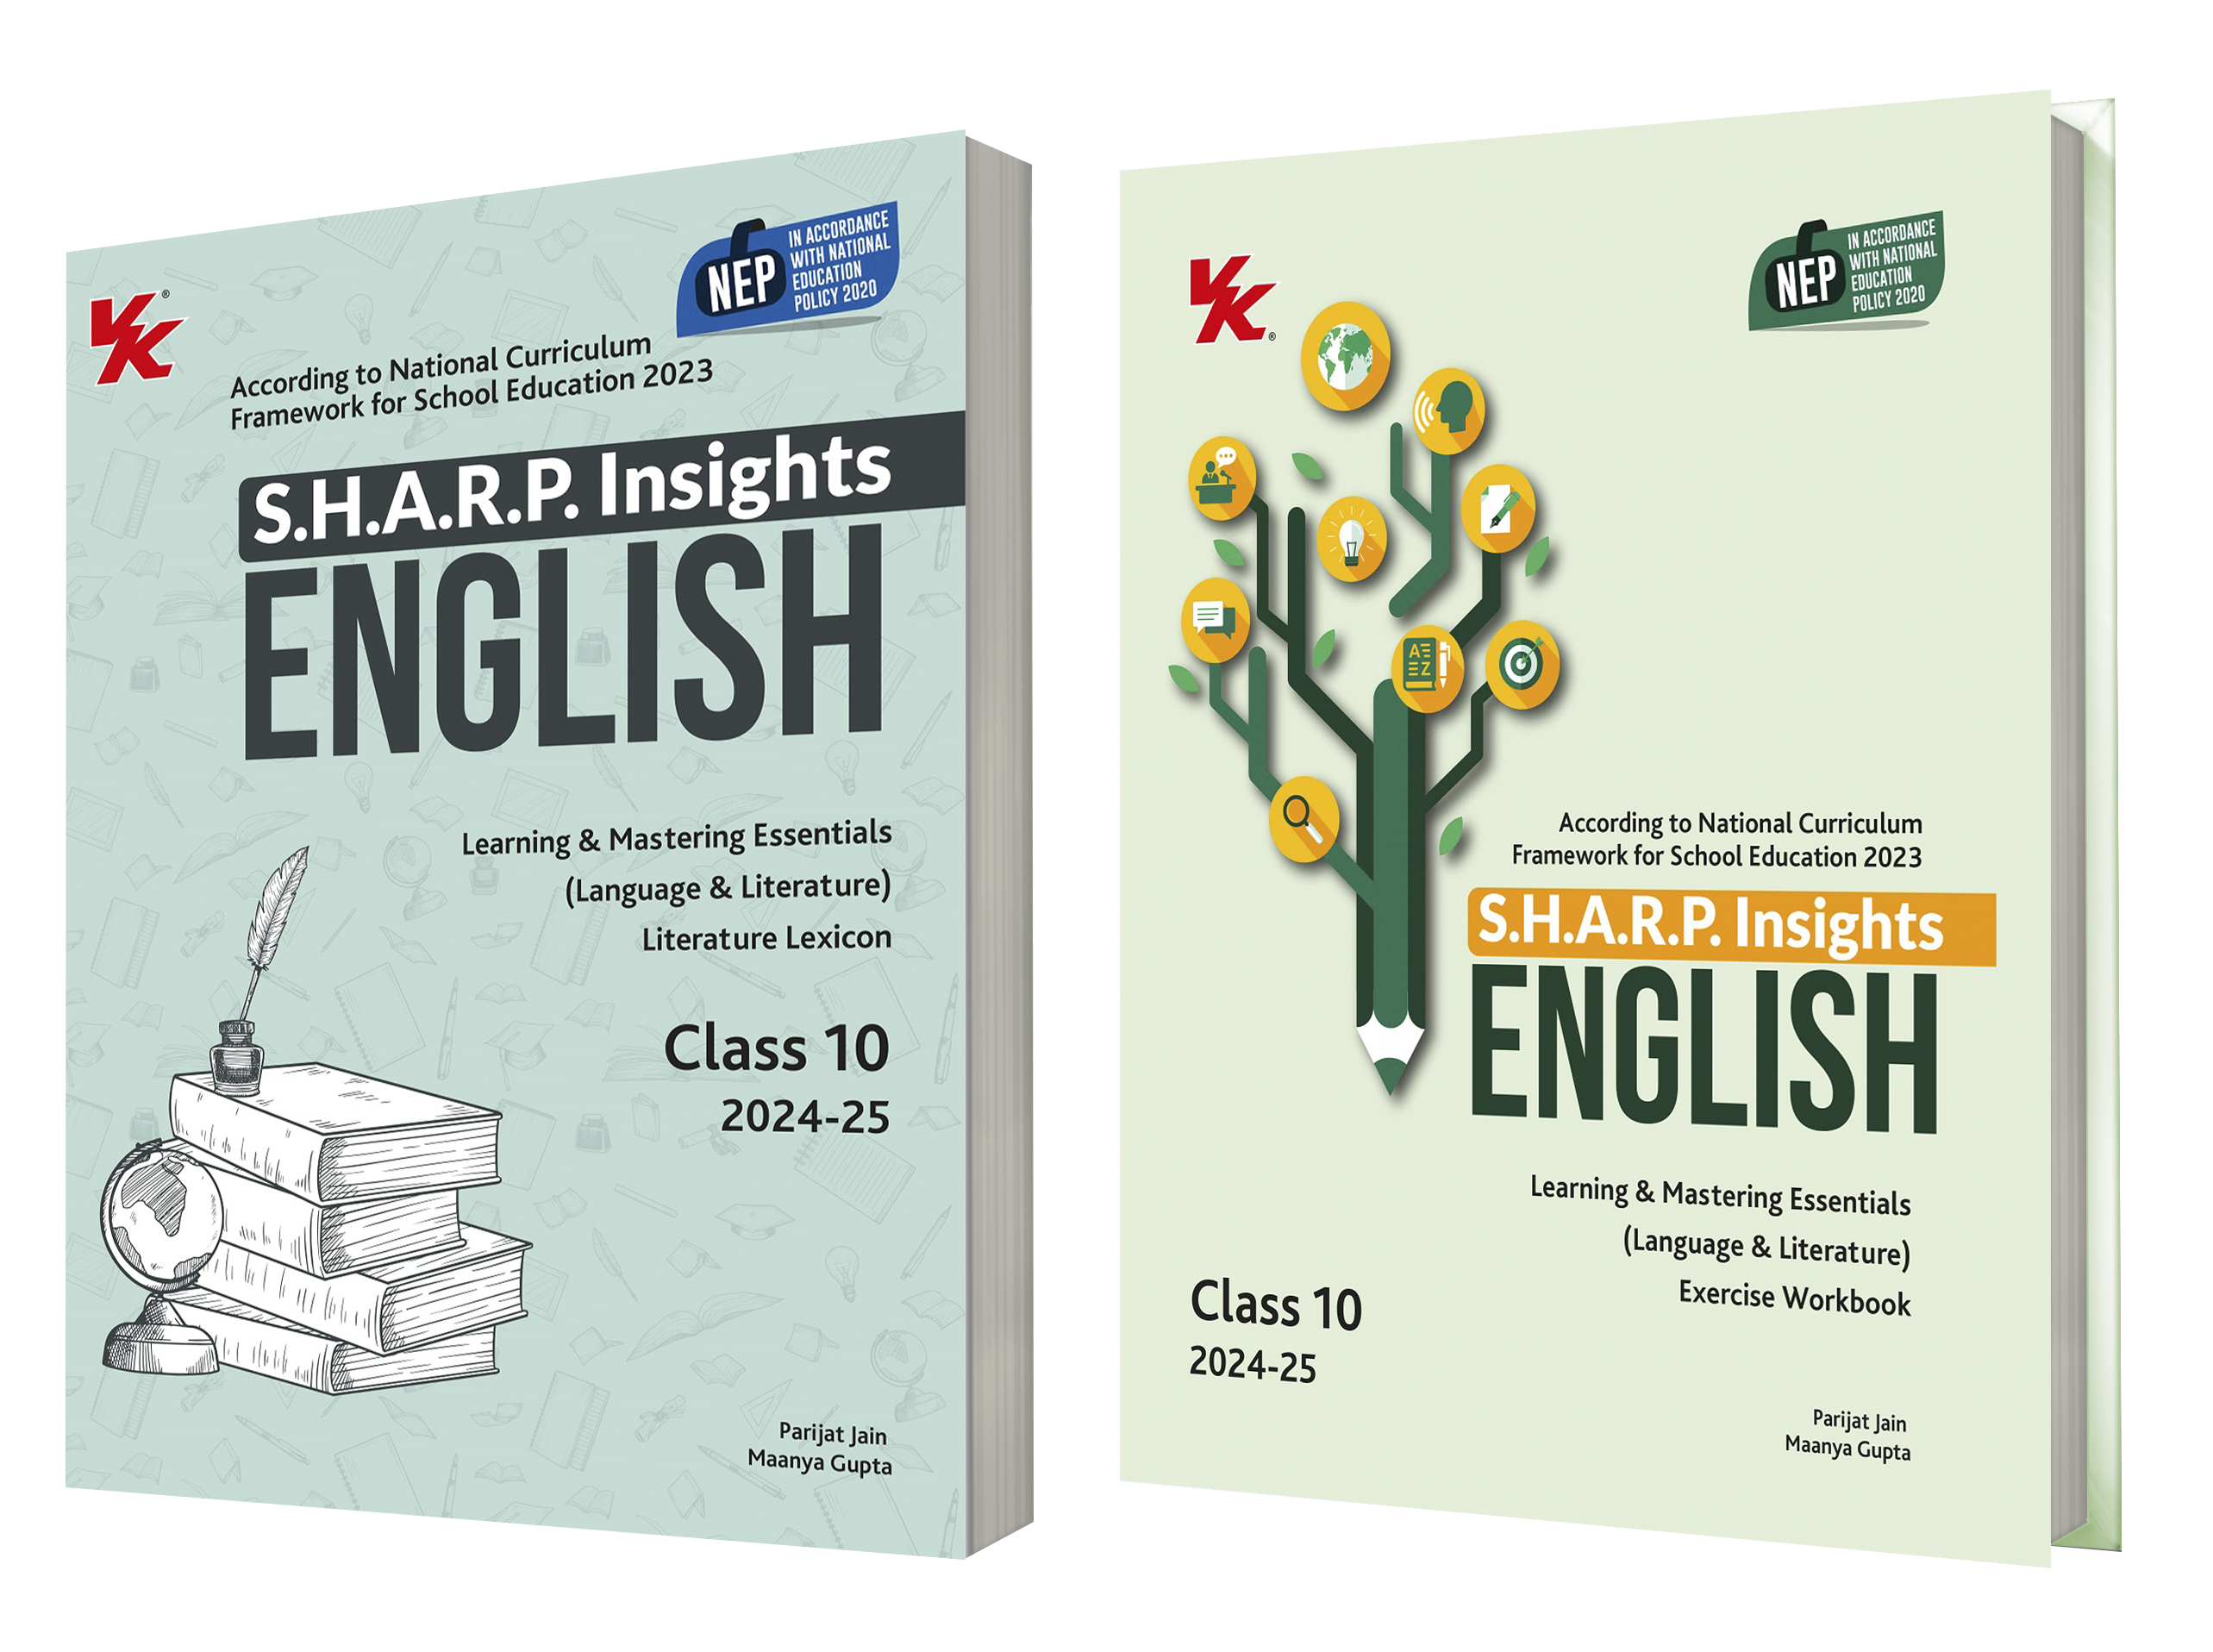 S.H.A.R.P. Insights for English ( Language and Literature ) Lexicon with Exercise Workbook for Class 10 CBSE 2024-25 (Set of 2 ) by Parijat Jain (IIT-D,IIM-A) & Maanya Gupta (IIM-A)